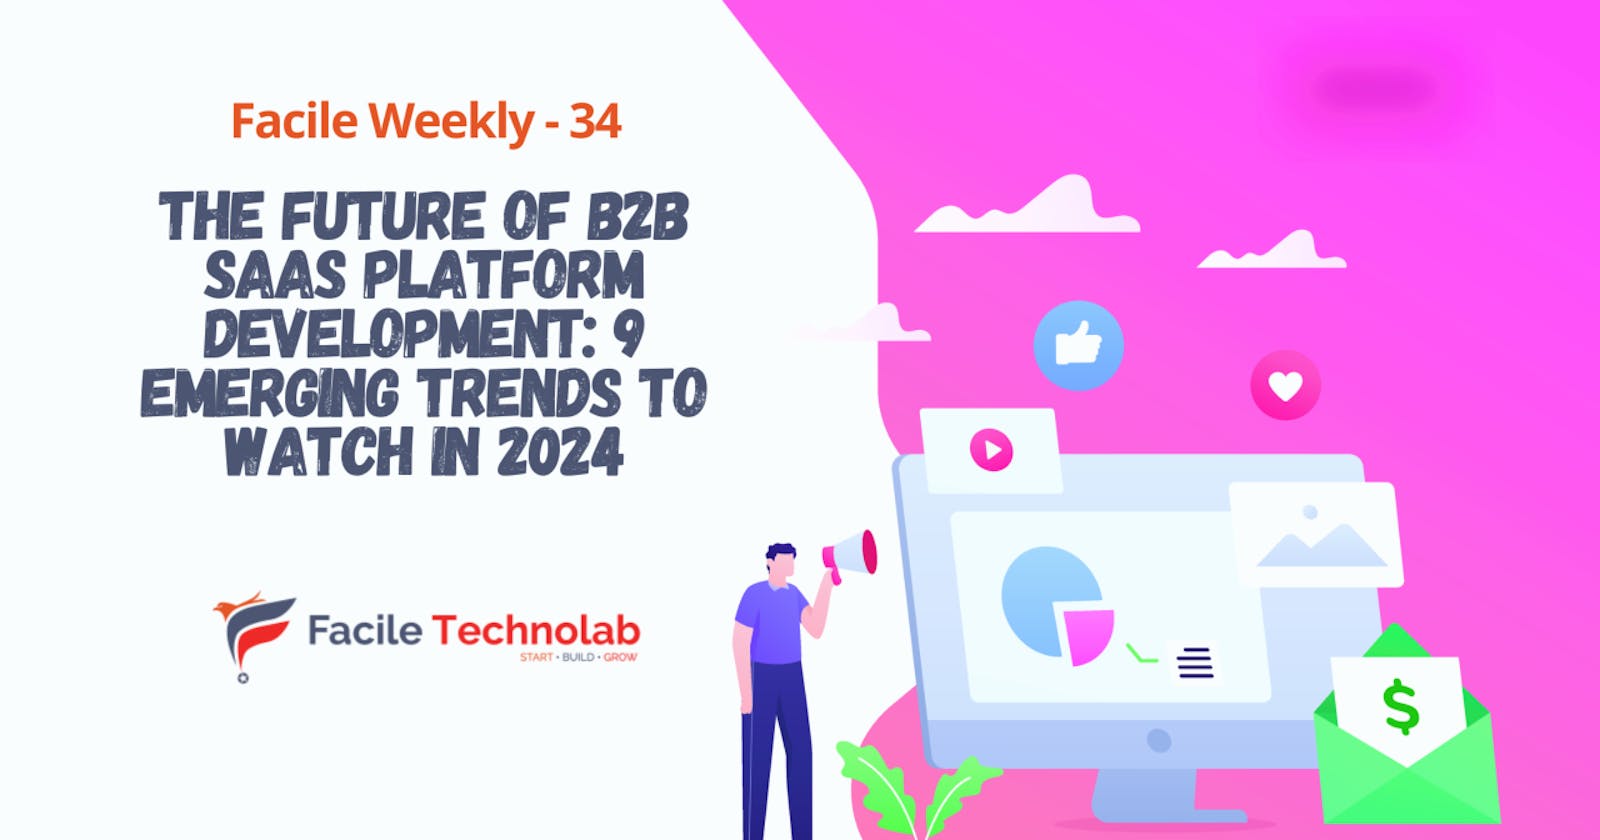 The Future of B2B SaaS Platform Development: 9 Emerging Trends to Watch in 2024